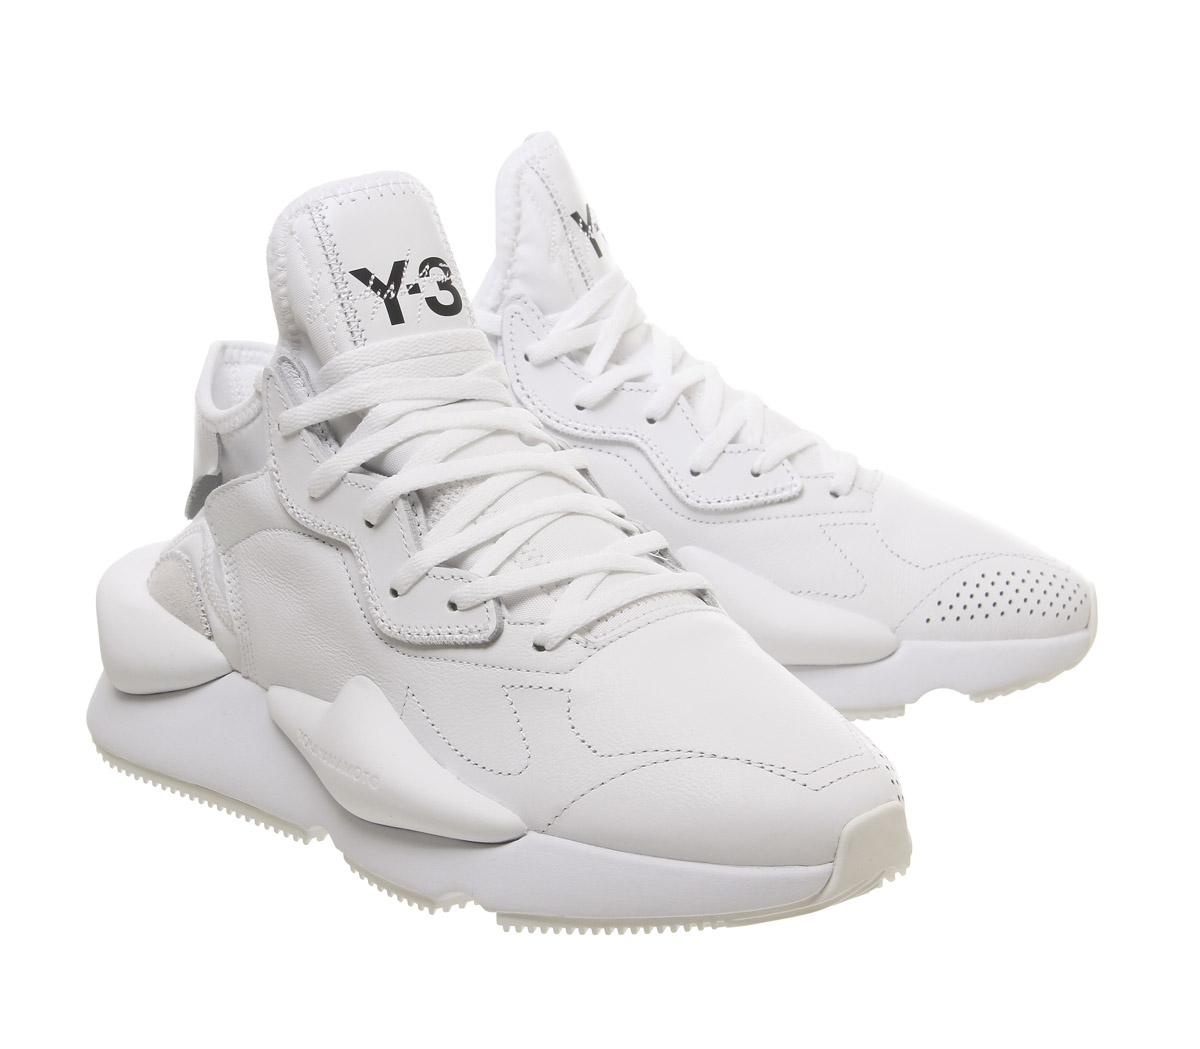 adidas Y3 Y3 Kaiwa Trainers White Leather - His trainers